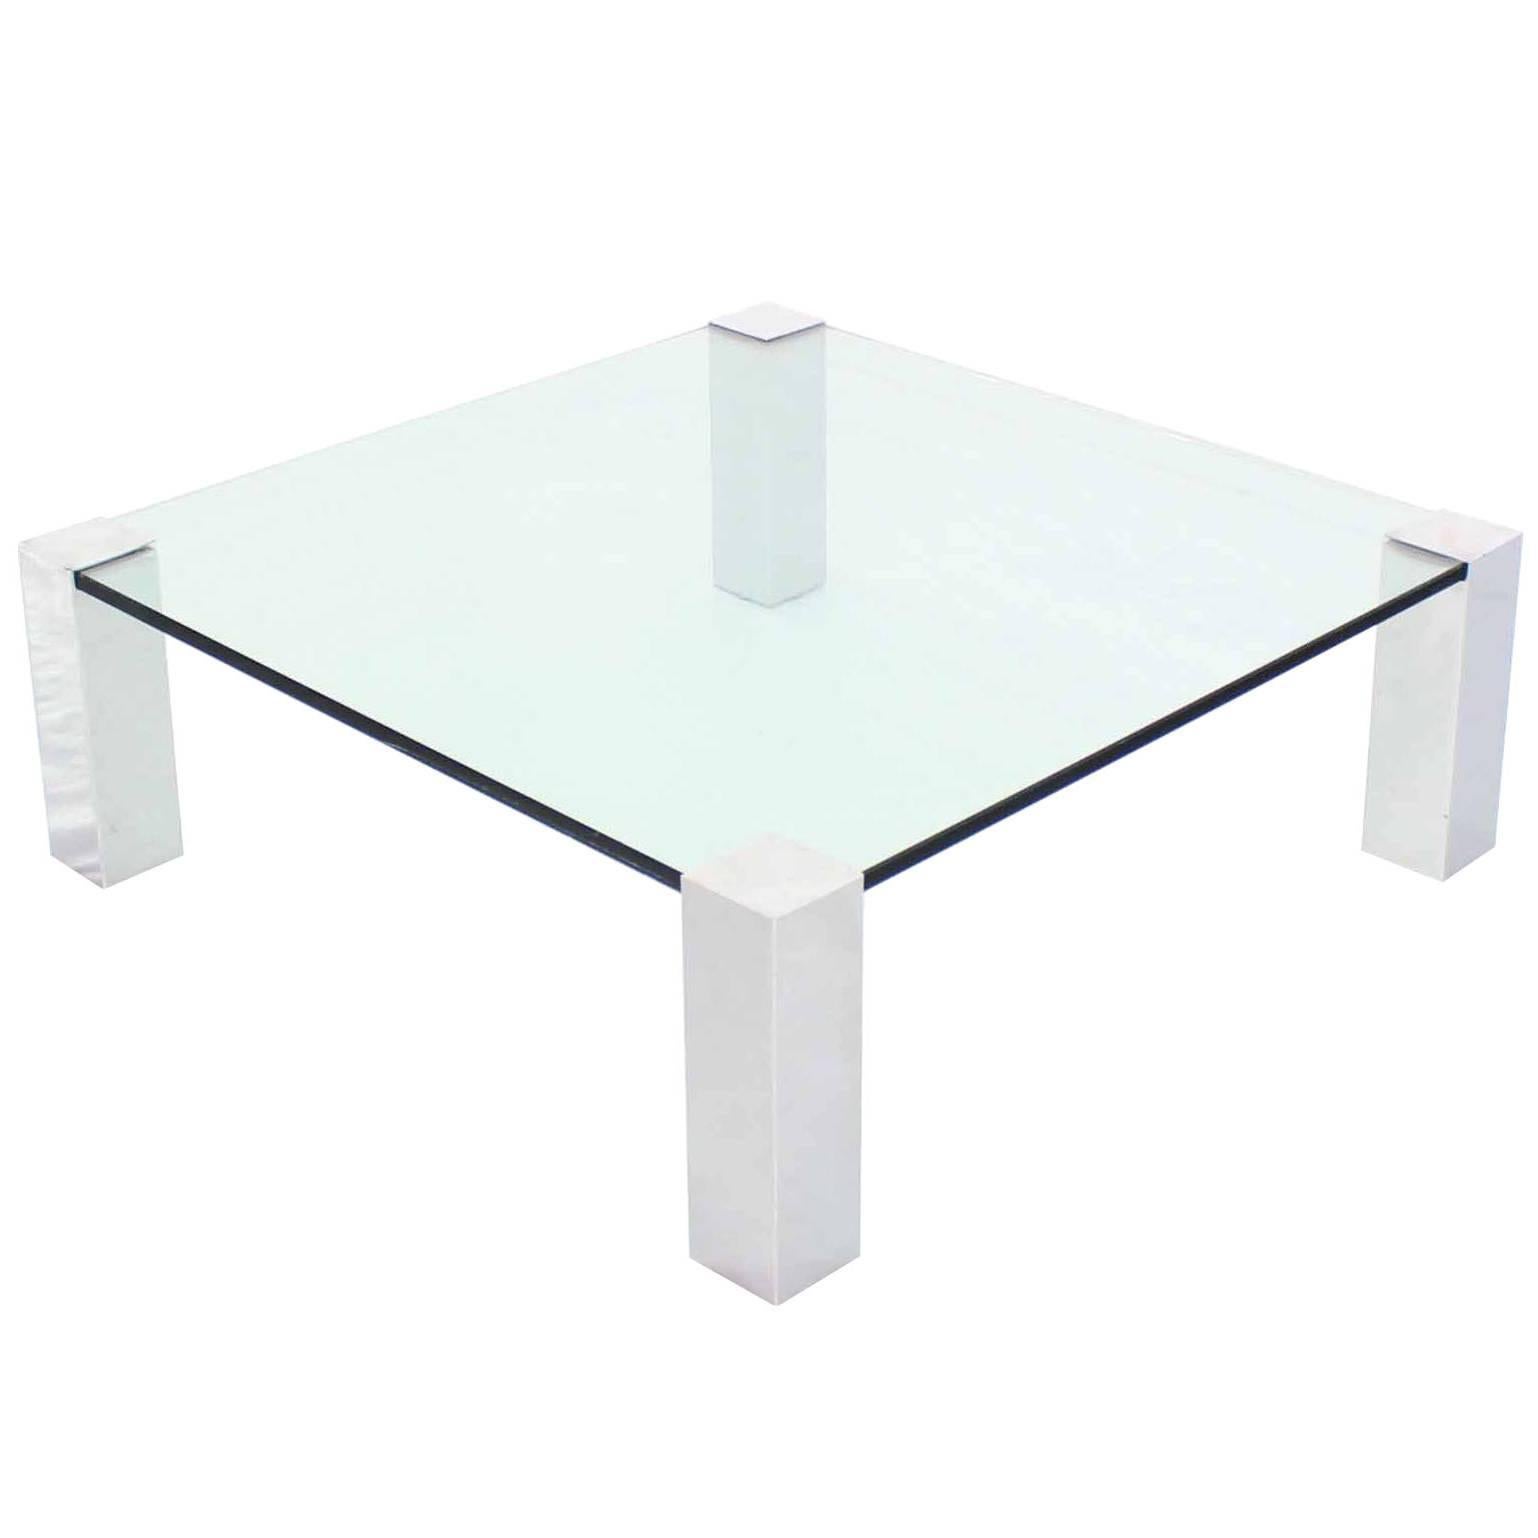 Large Square Mid Century Modern Coffee Table on Chrome Corner Legs For Sale